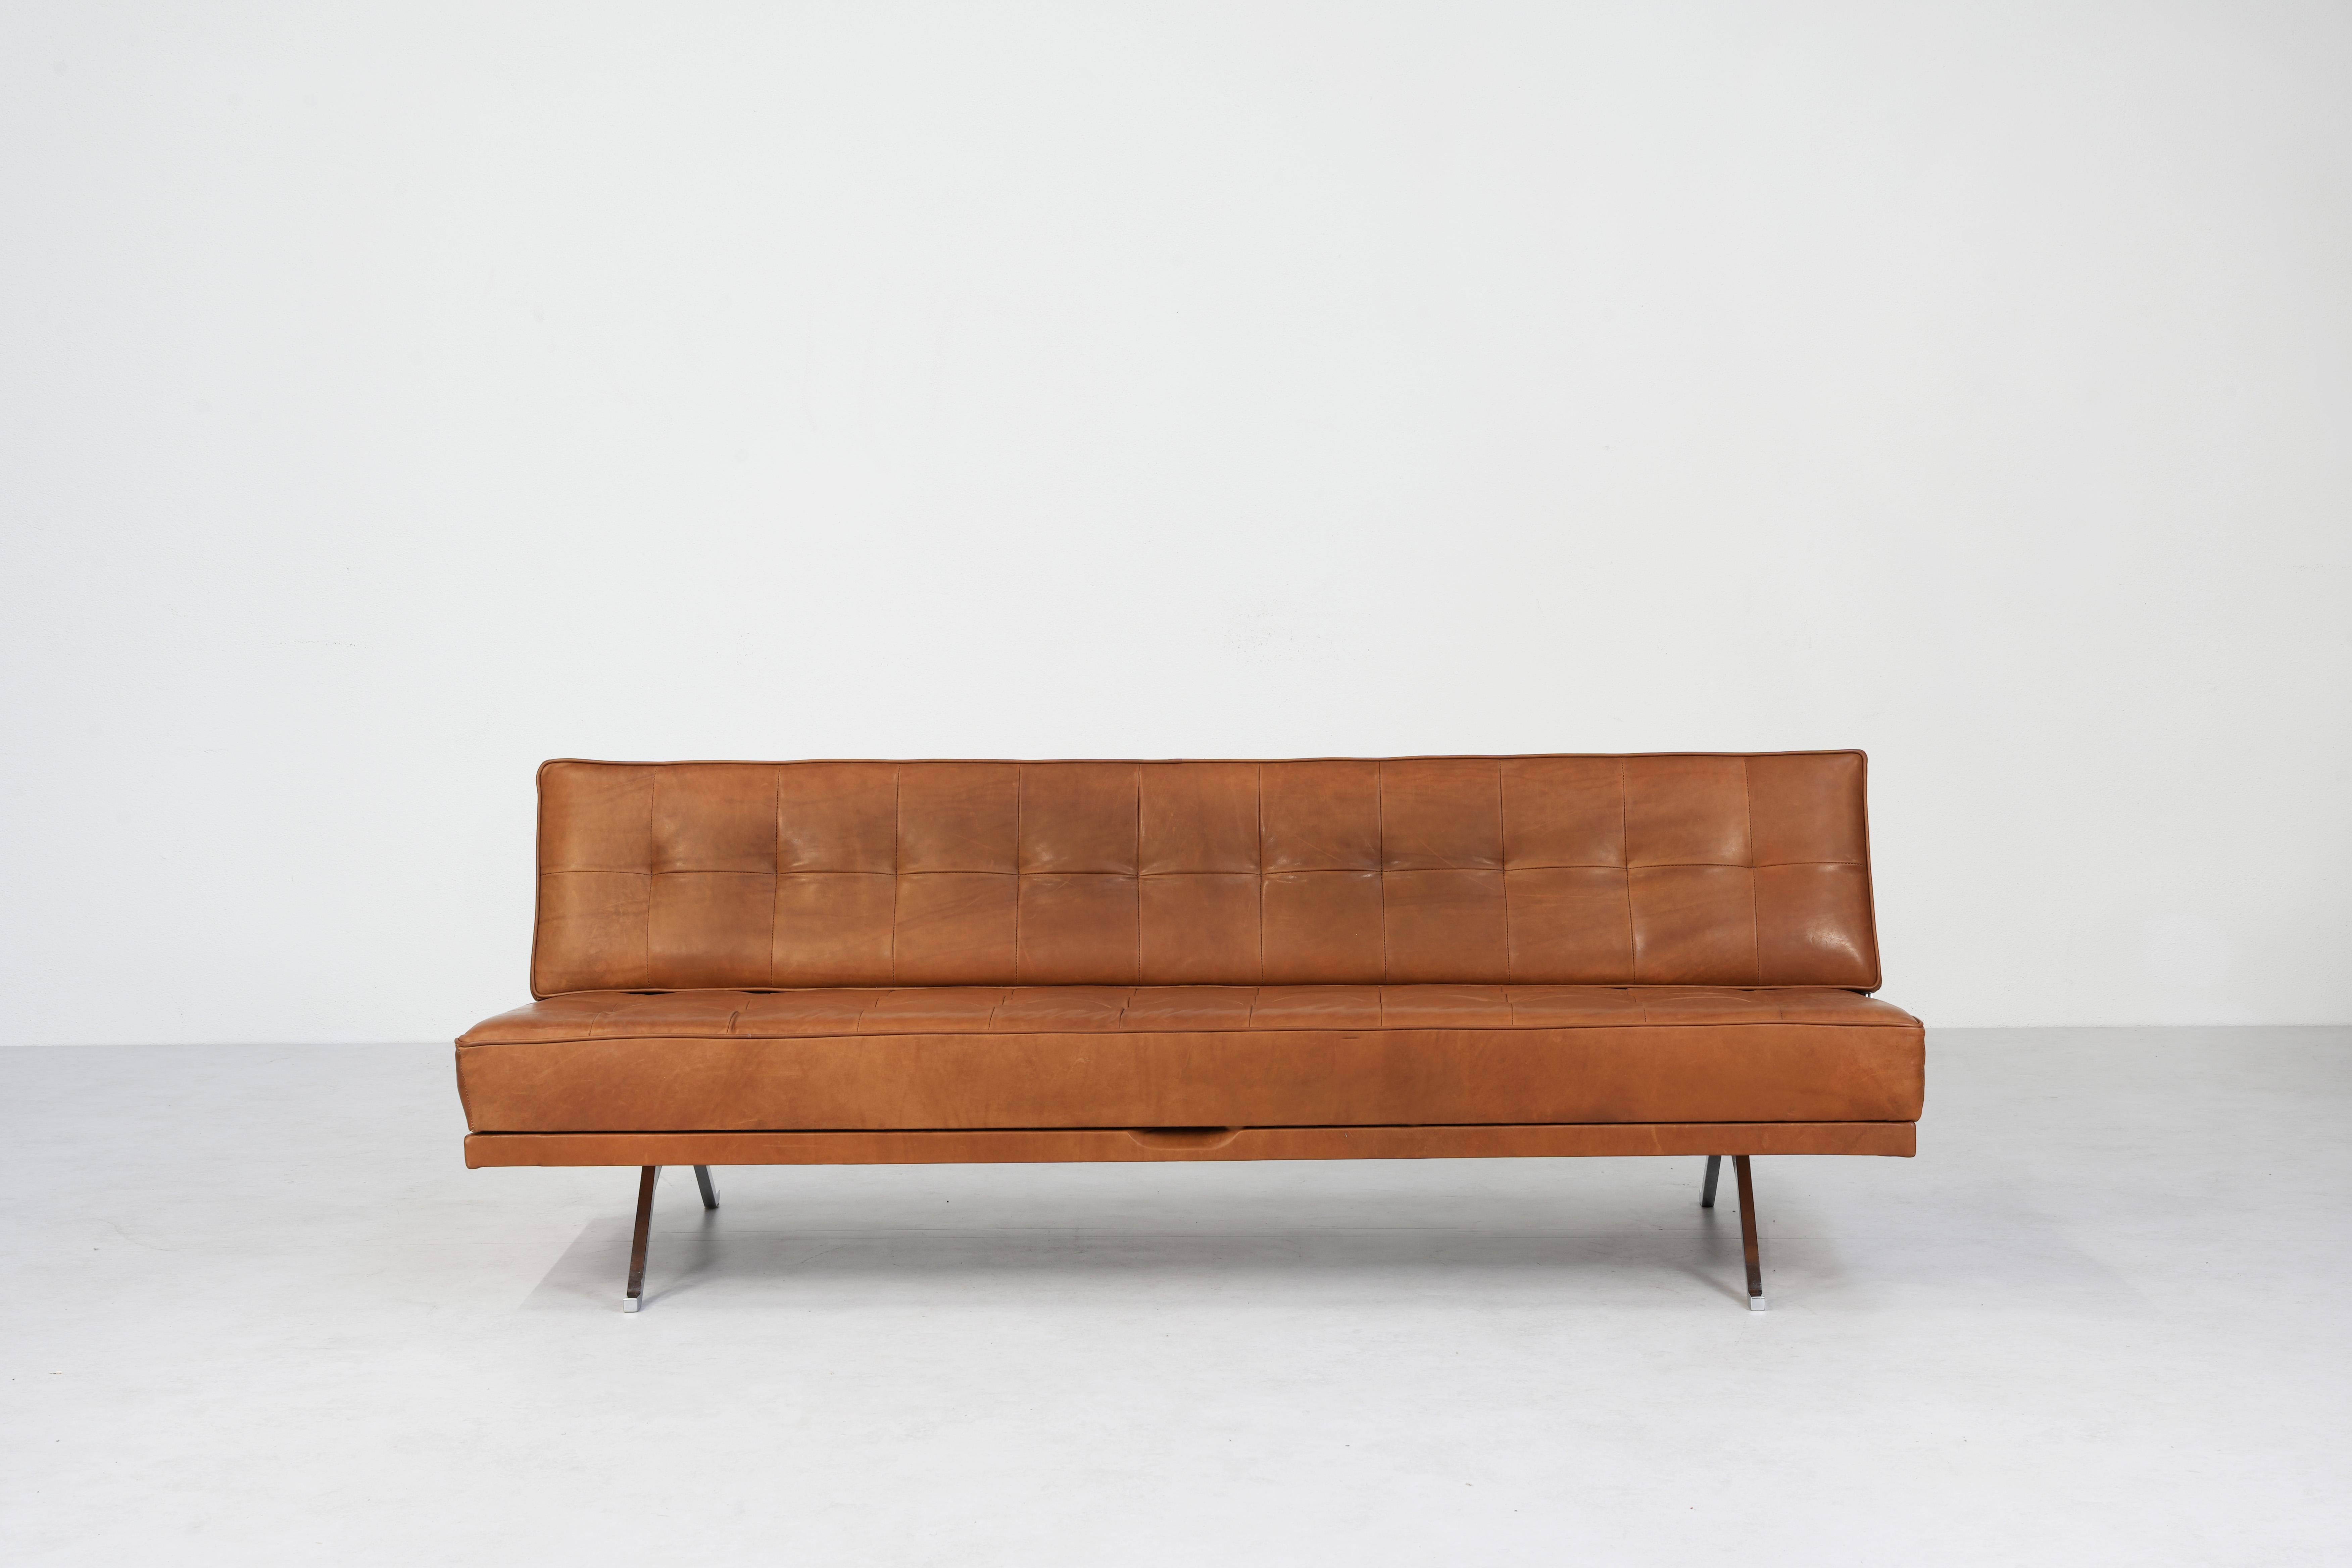 Beautiful Sofa Daybed Mod. Constanze Designed by Johannes Spalt for Wittmann, Austria 1960ies.
An elegant construction, that can be converted from a sofa into a bed with one hand and in seconds. 
The sofa comes in brown cognac leather and is in